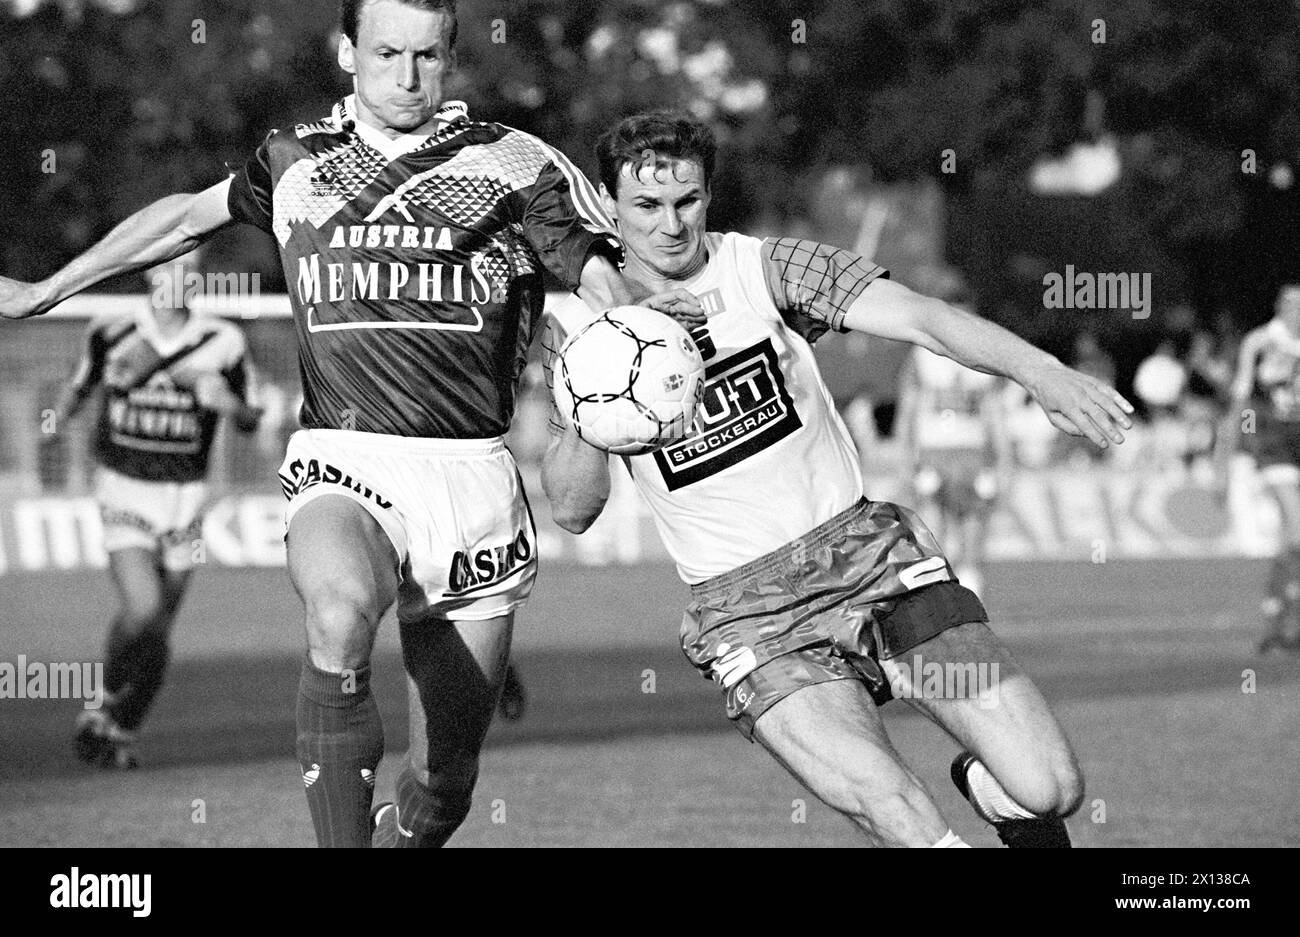 Match between Austria Vienna vs Stockerau in the context of the Supercup in Stockerau on July 20th 1991. Picture: Anton Pfeffer and Walicek (Stockerau). Austria won the match with 3:0. - 19910720 PD0008 - Rechteinfo: Rights Managed (RM) Stock Photo